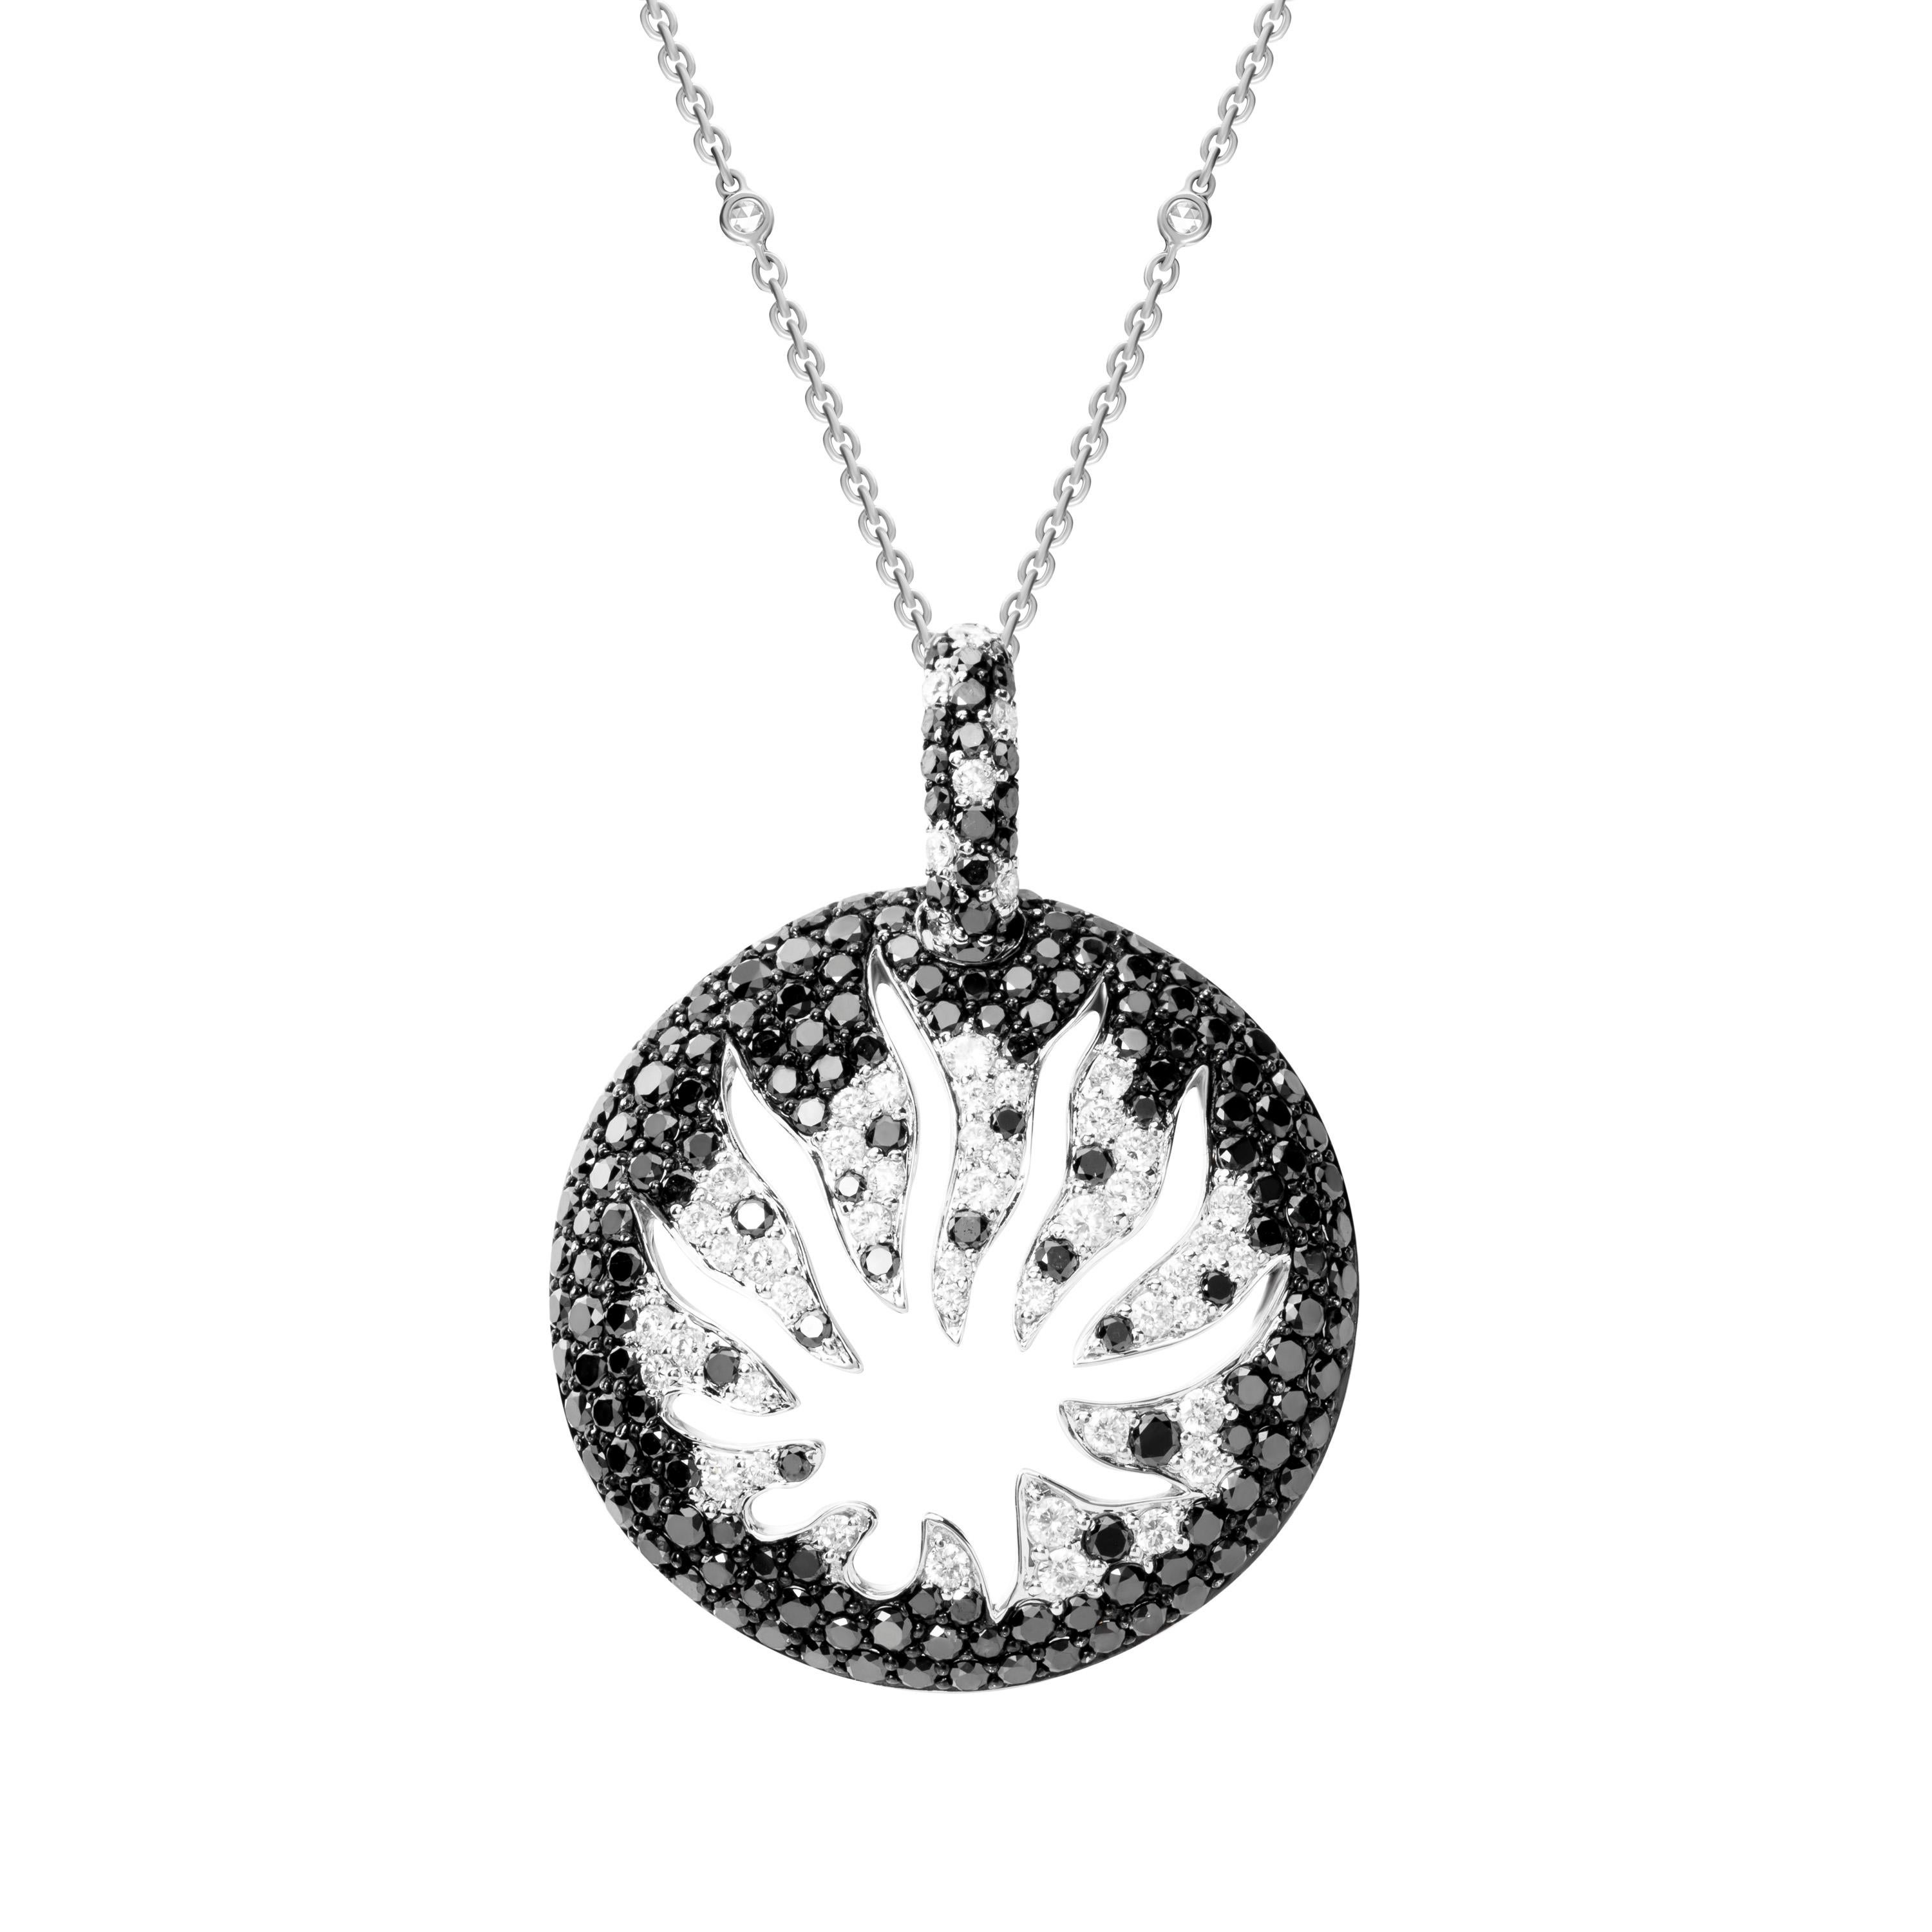 Made from 18-karat white gold, this medallion pendant necklace beams with luminous black and white diamonds weighing a total of 4.12 carats and is traced with spokes symbolizing rays of light in the constellation.  0.63 carats of rose cut round